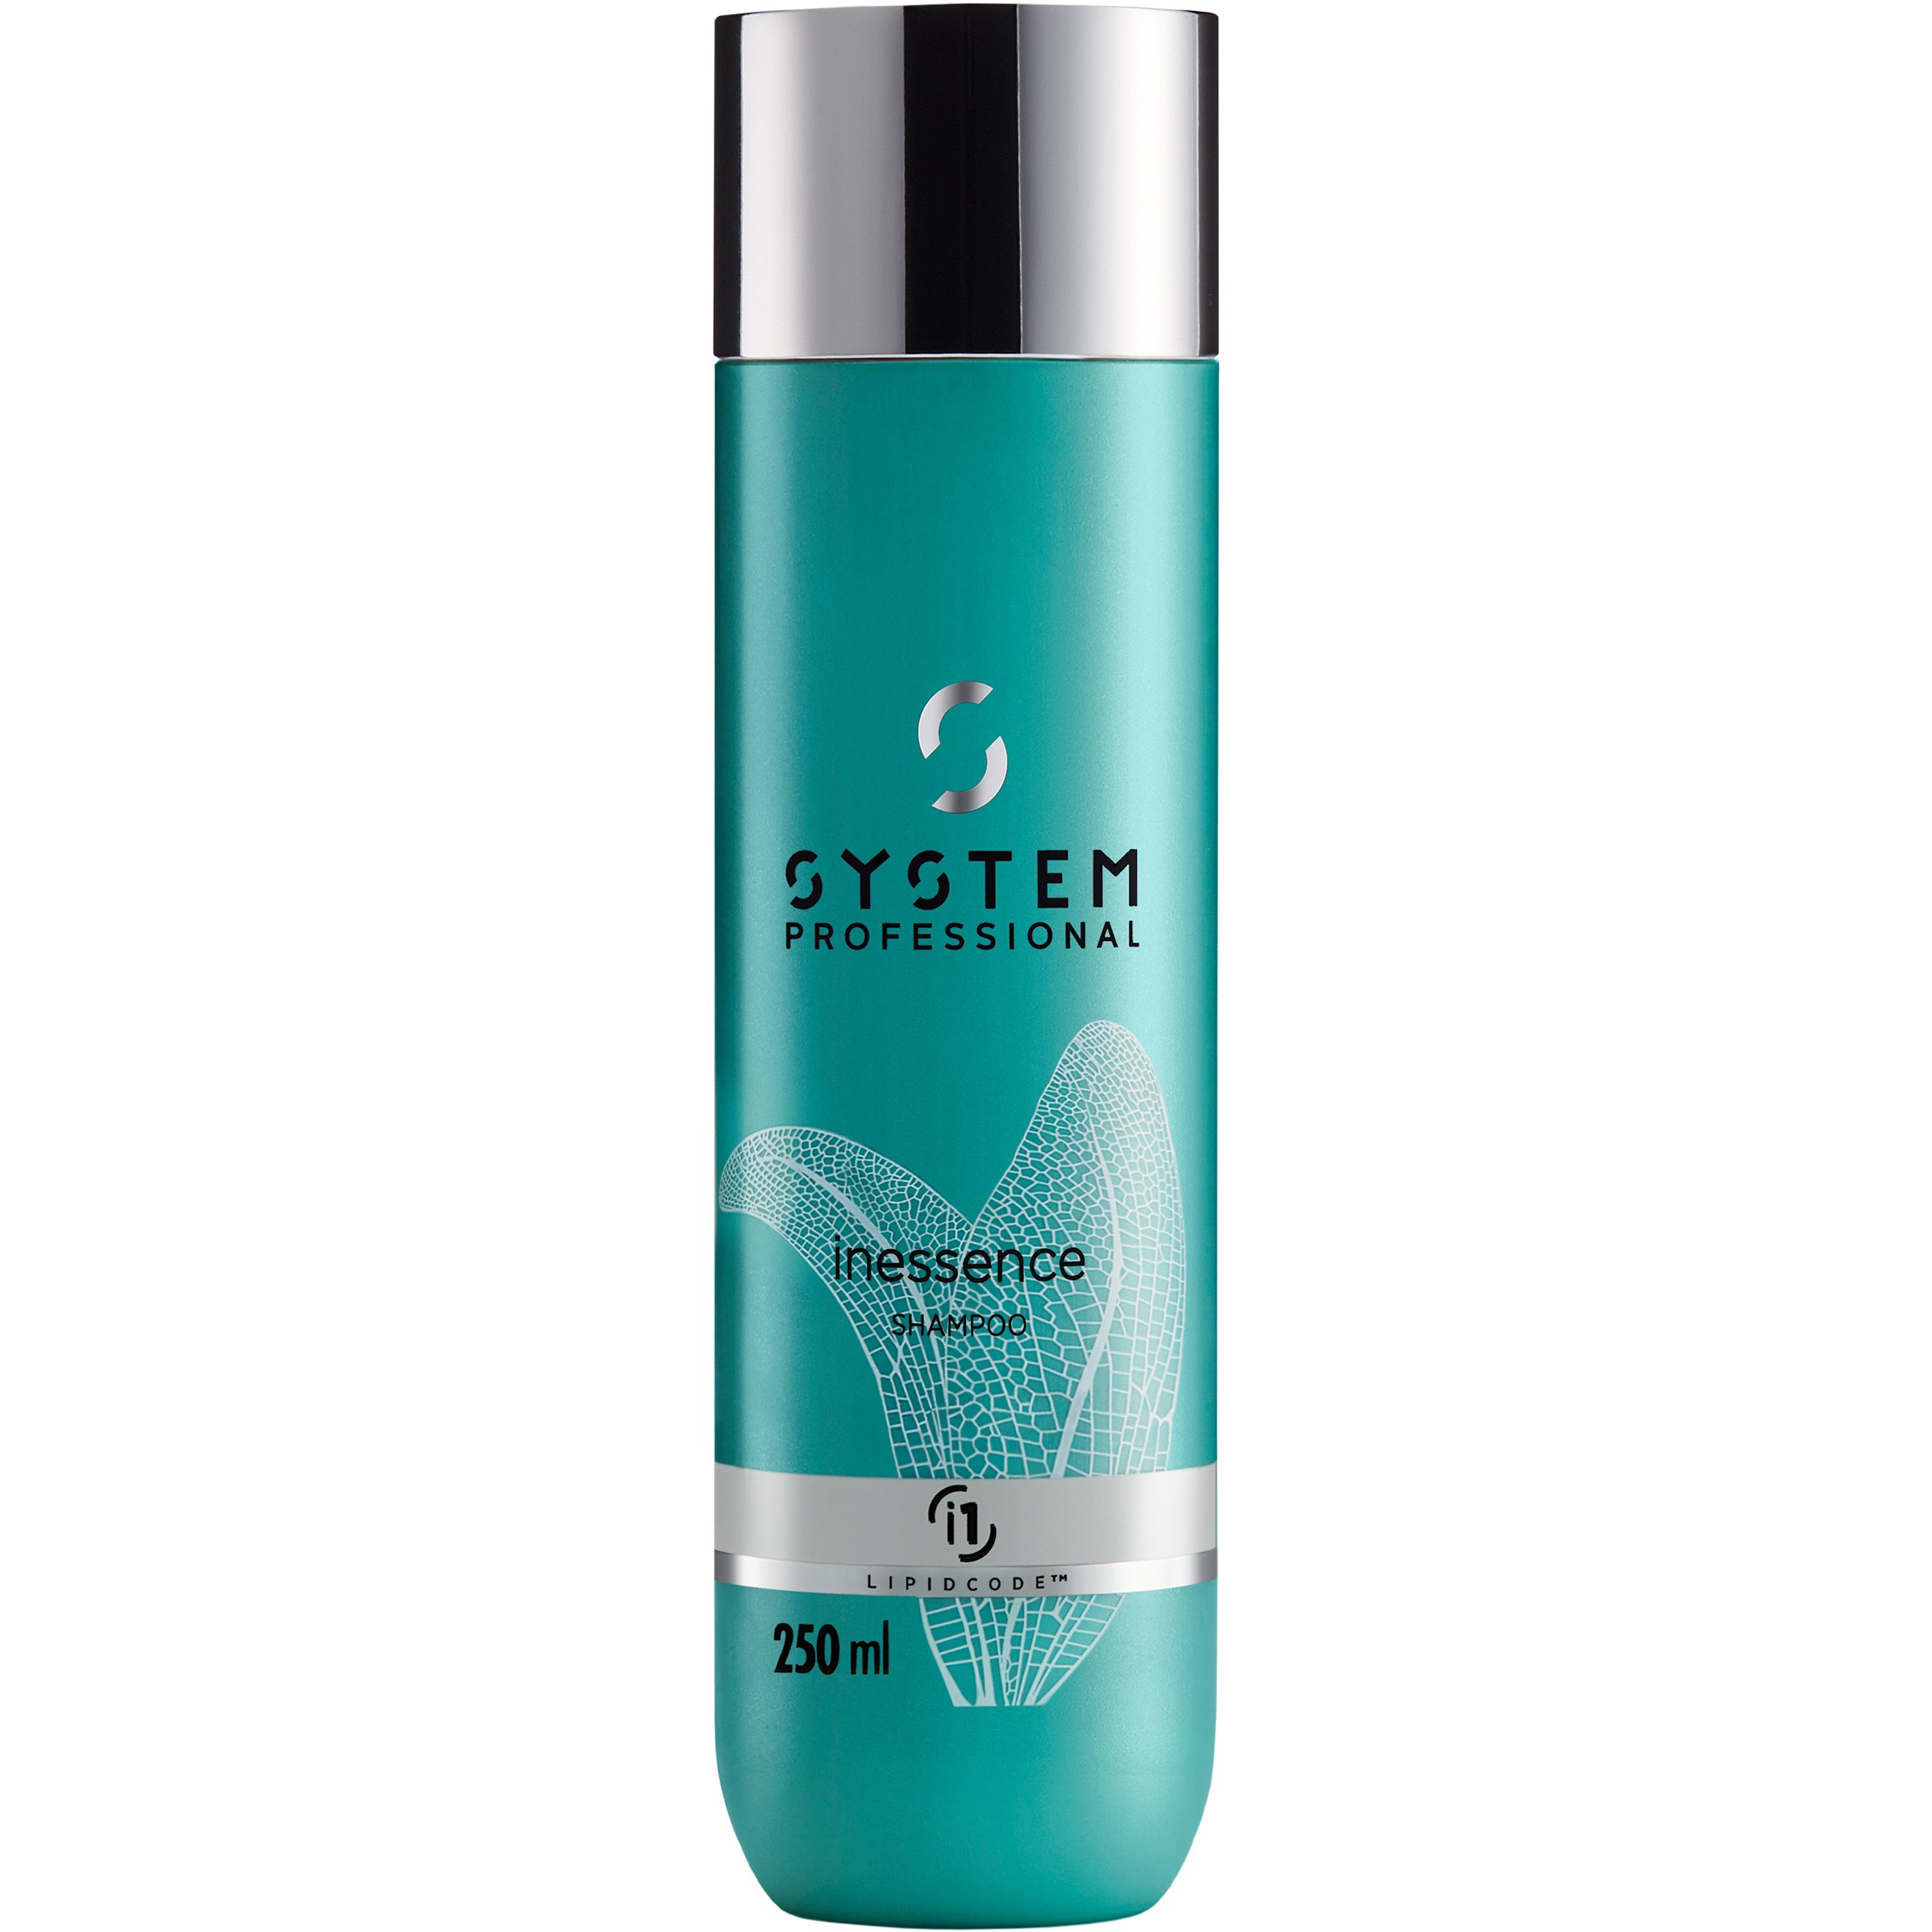 System Professional Inessence Hair Rejuvenating Cleanser Shampoo